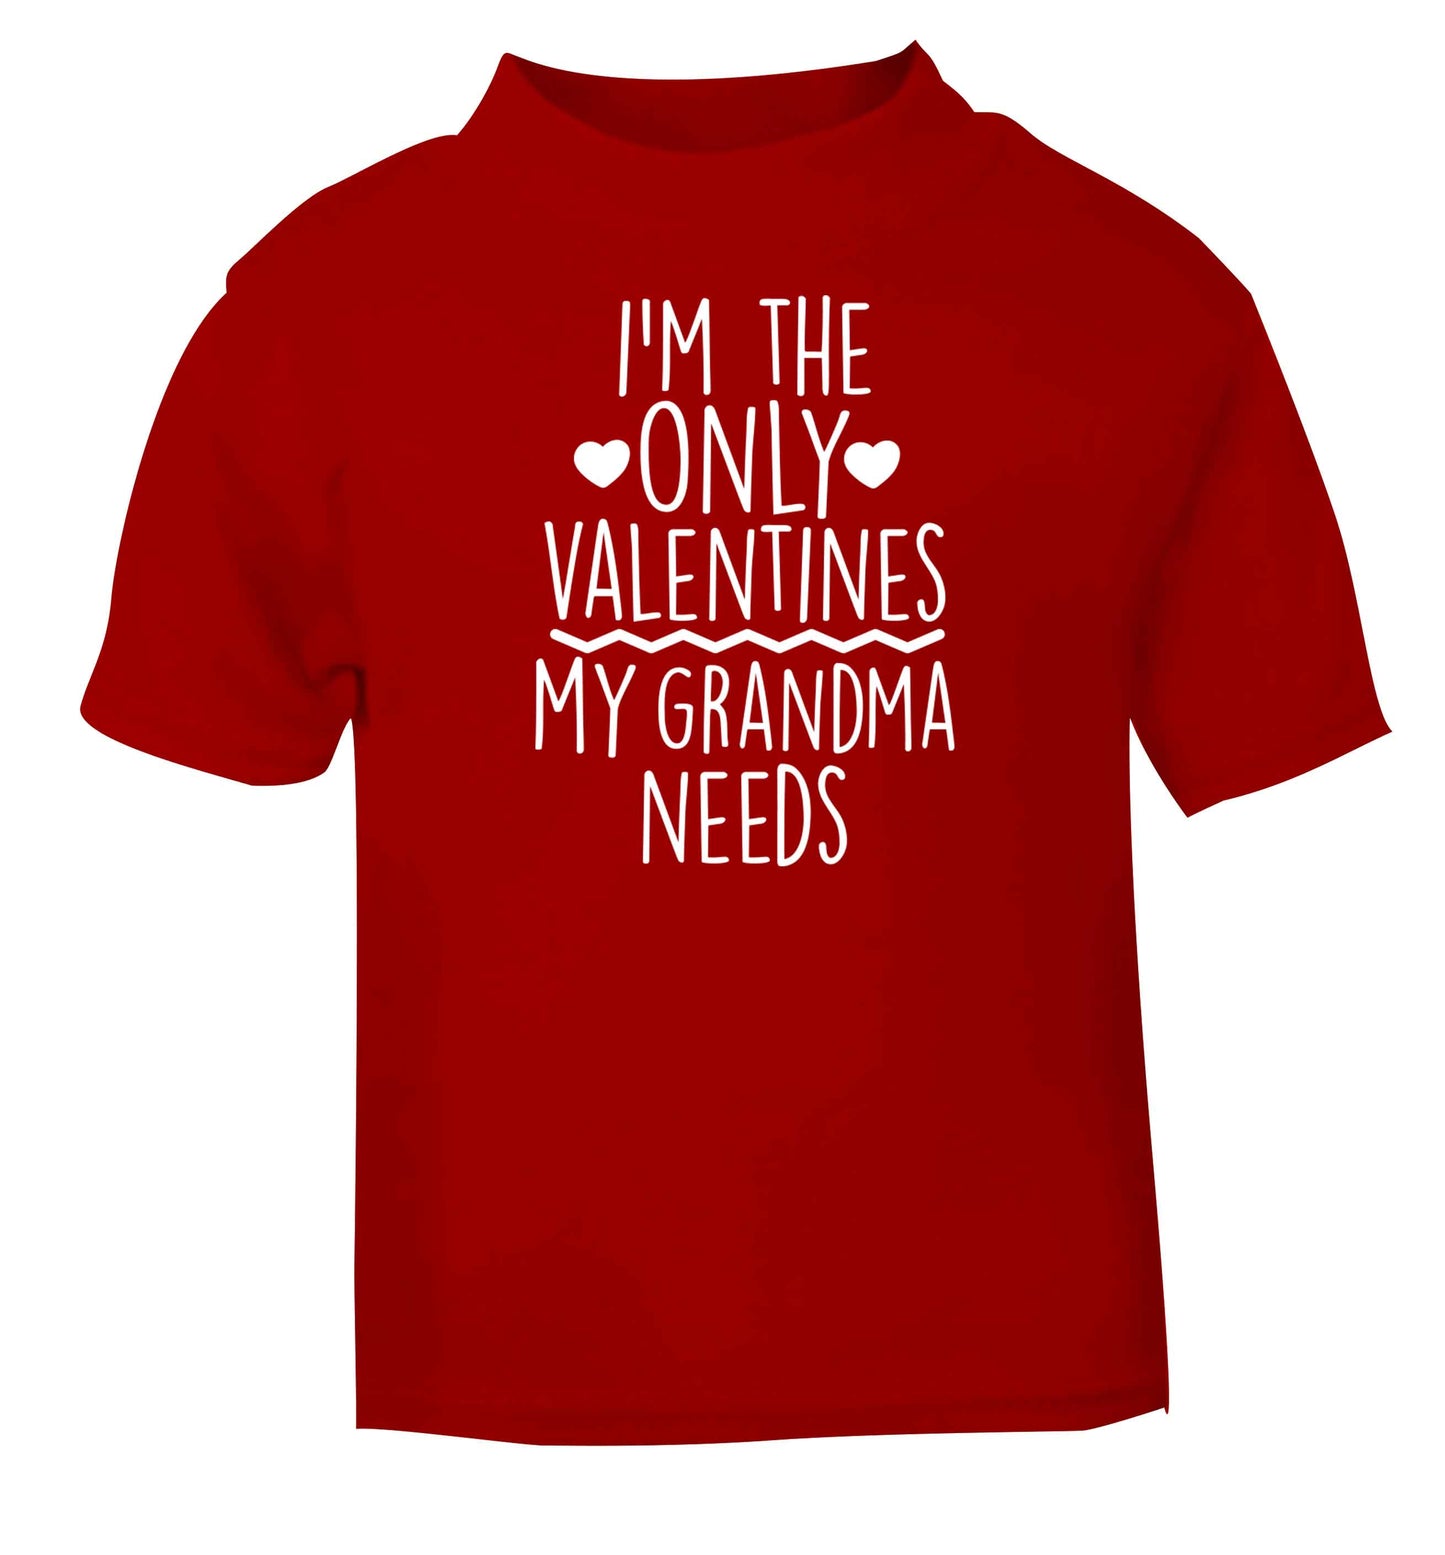 I'm the only valentines my grandma needs red baby toddler Tshirt 2 Years